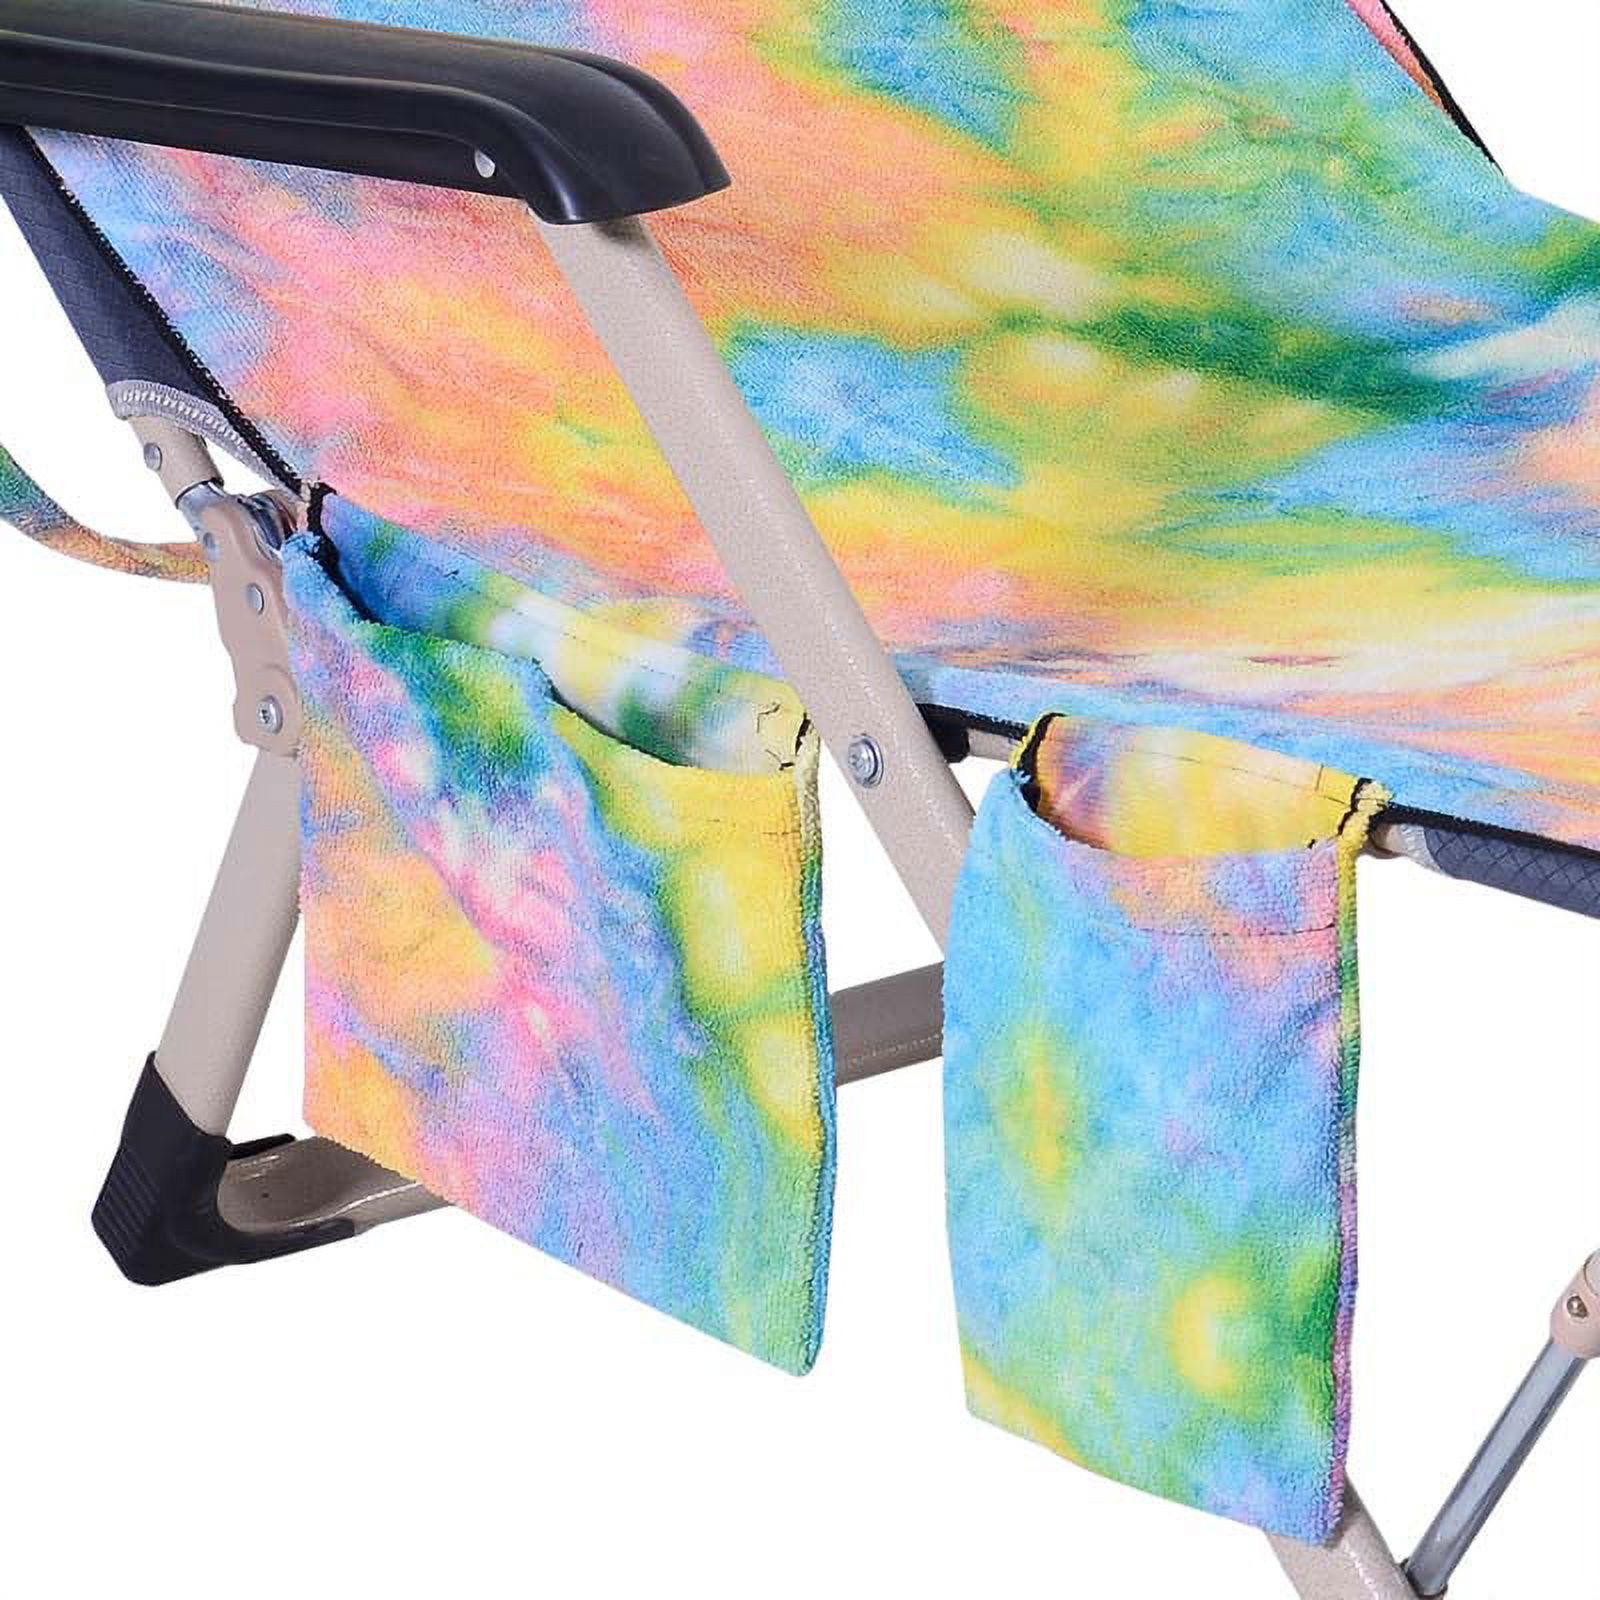 Beach Chair Cover Towel Lounge Chair Towel Cover with Side Storage Pockets Microfiber Terry Beach Towel for Pool Sun Lounger Sunbathing Vacation 82.5"x29.5" - image 5 of 8